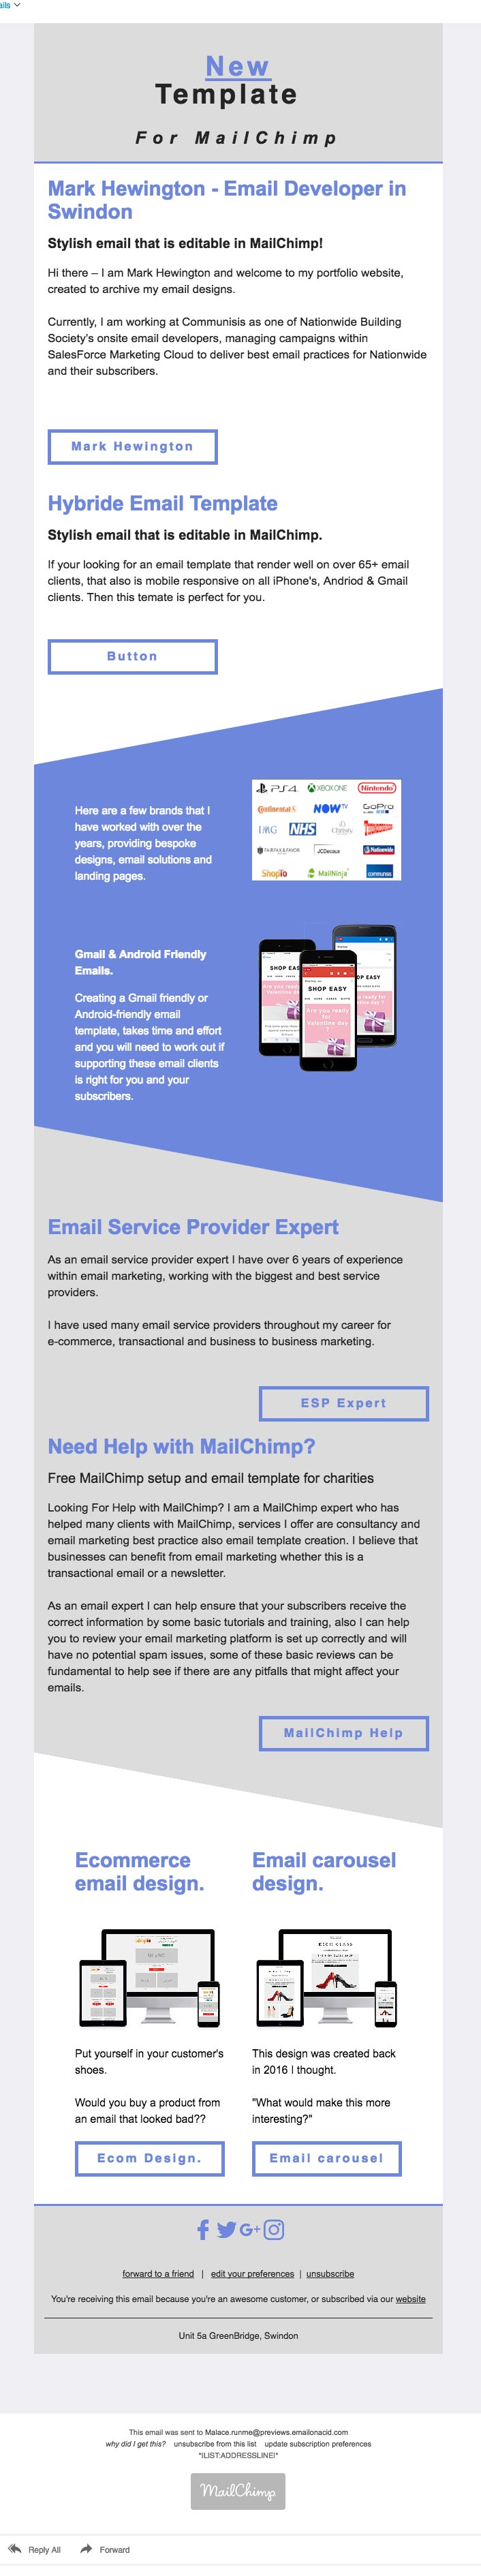 Editable MailChimp Email Template for AOL web clients 